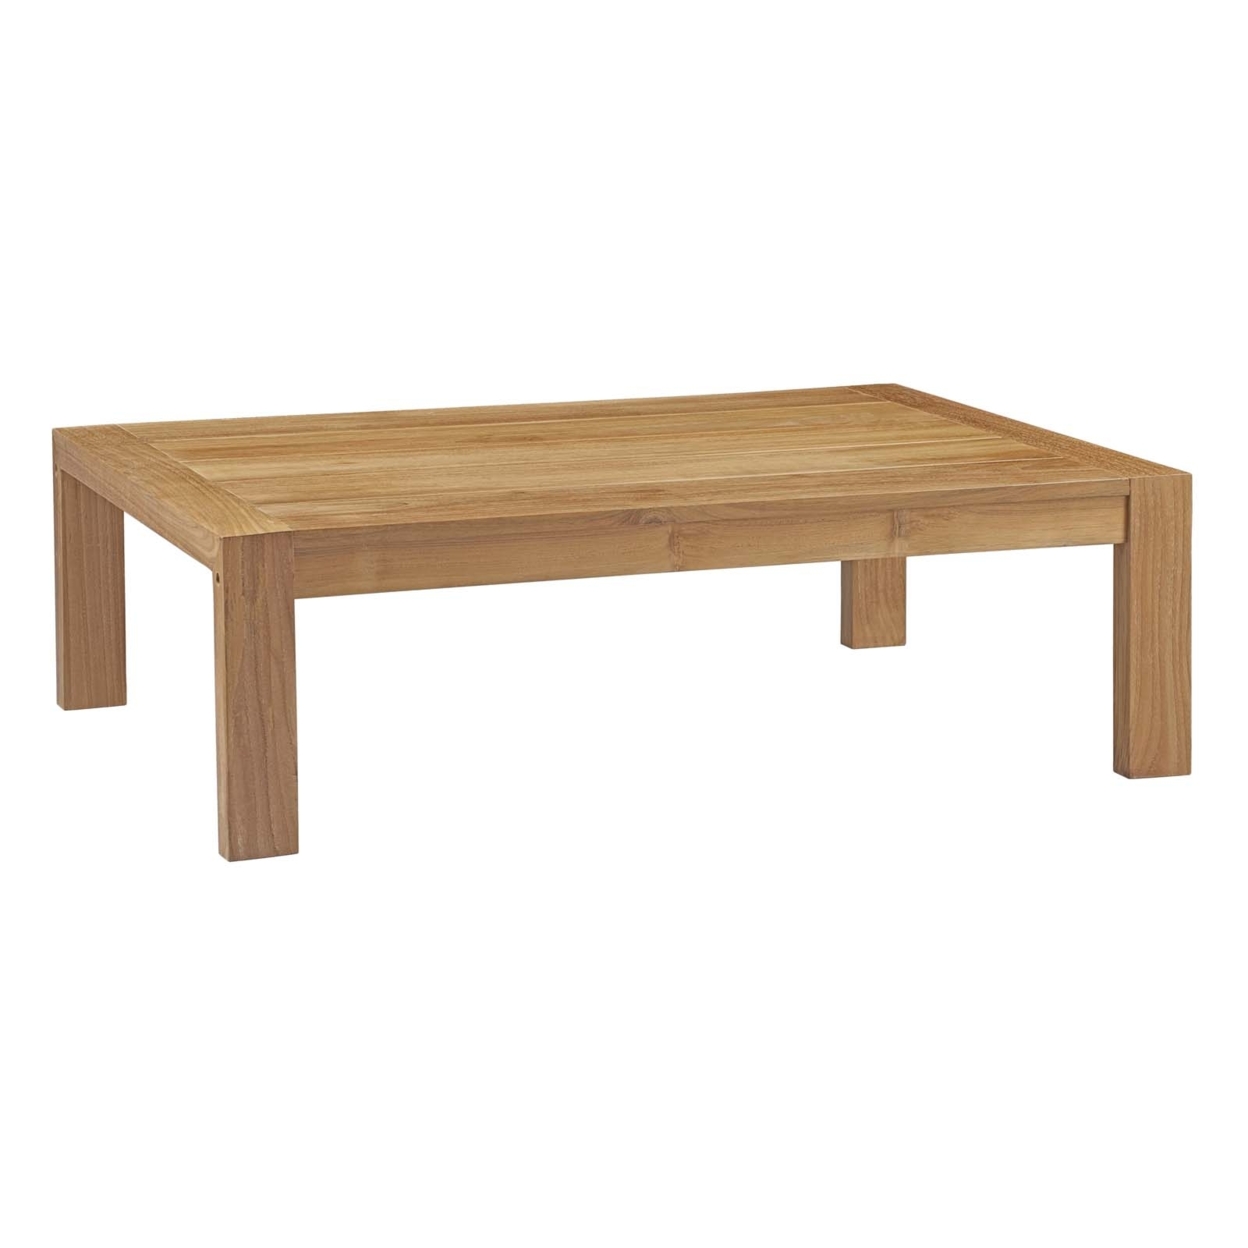 Modway Upland Outdoor Patio Wood Coffee Table in Natural - image 1 of 4